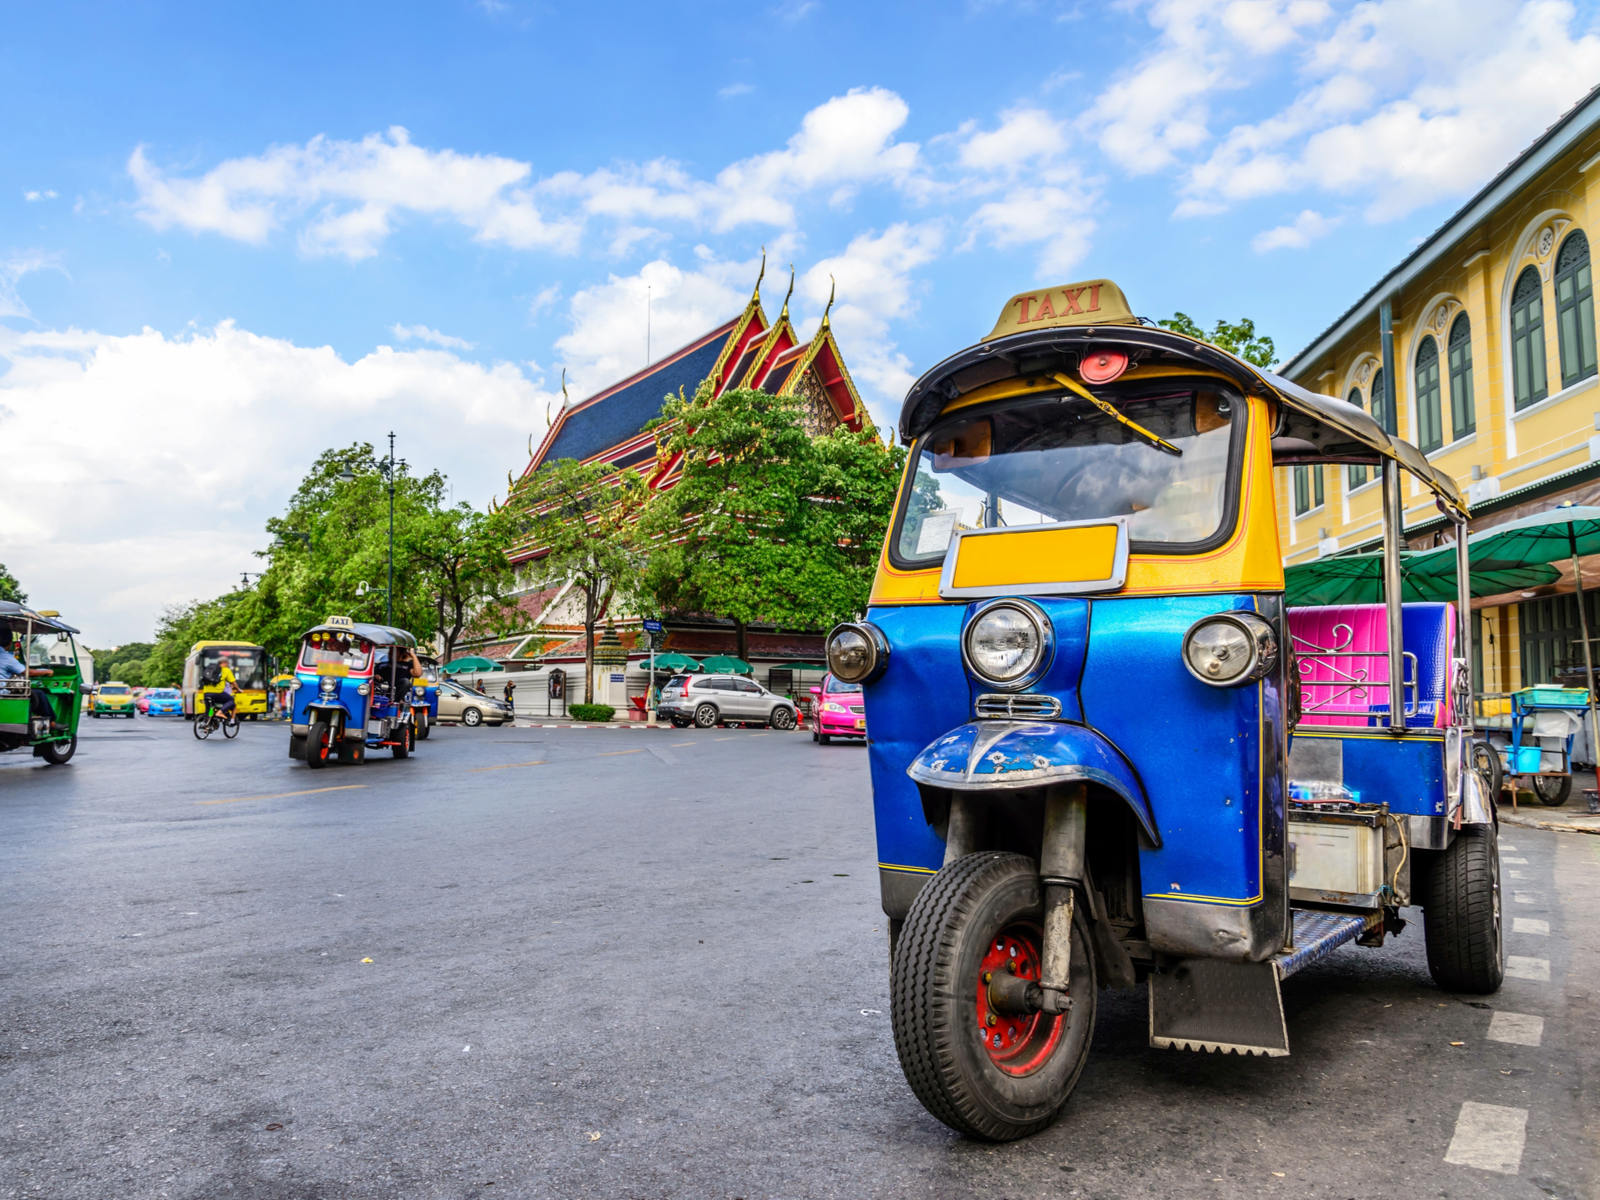 Blue Tuk Tuk, a traditional form of transportation, during the best time to visit Thailand